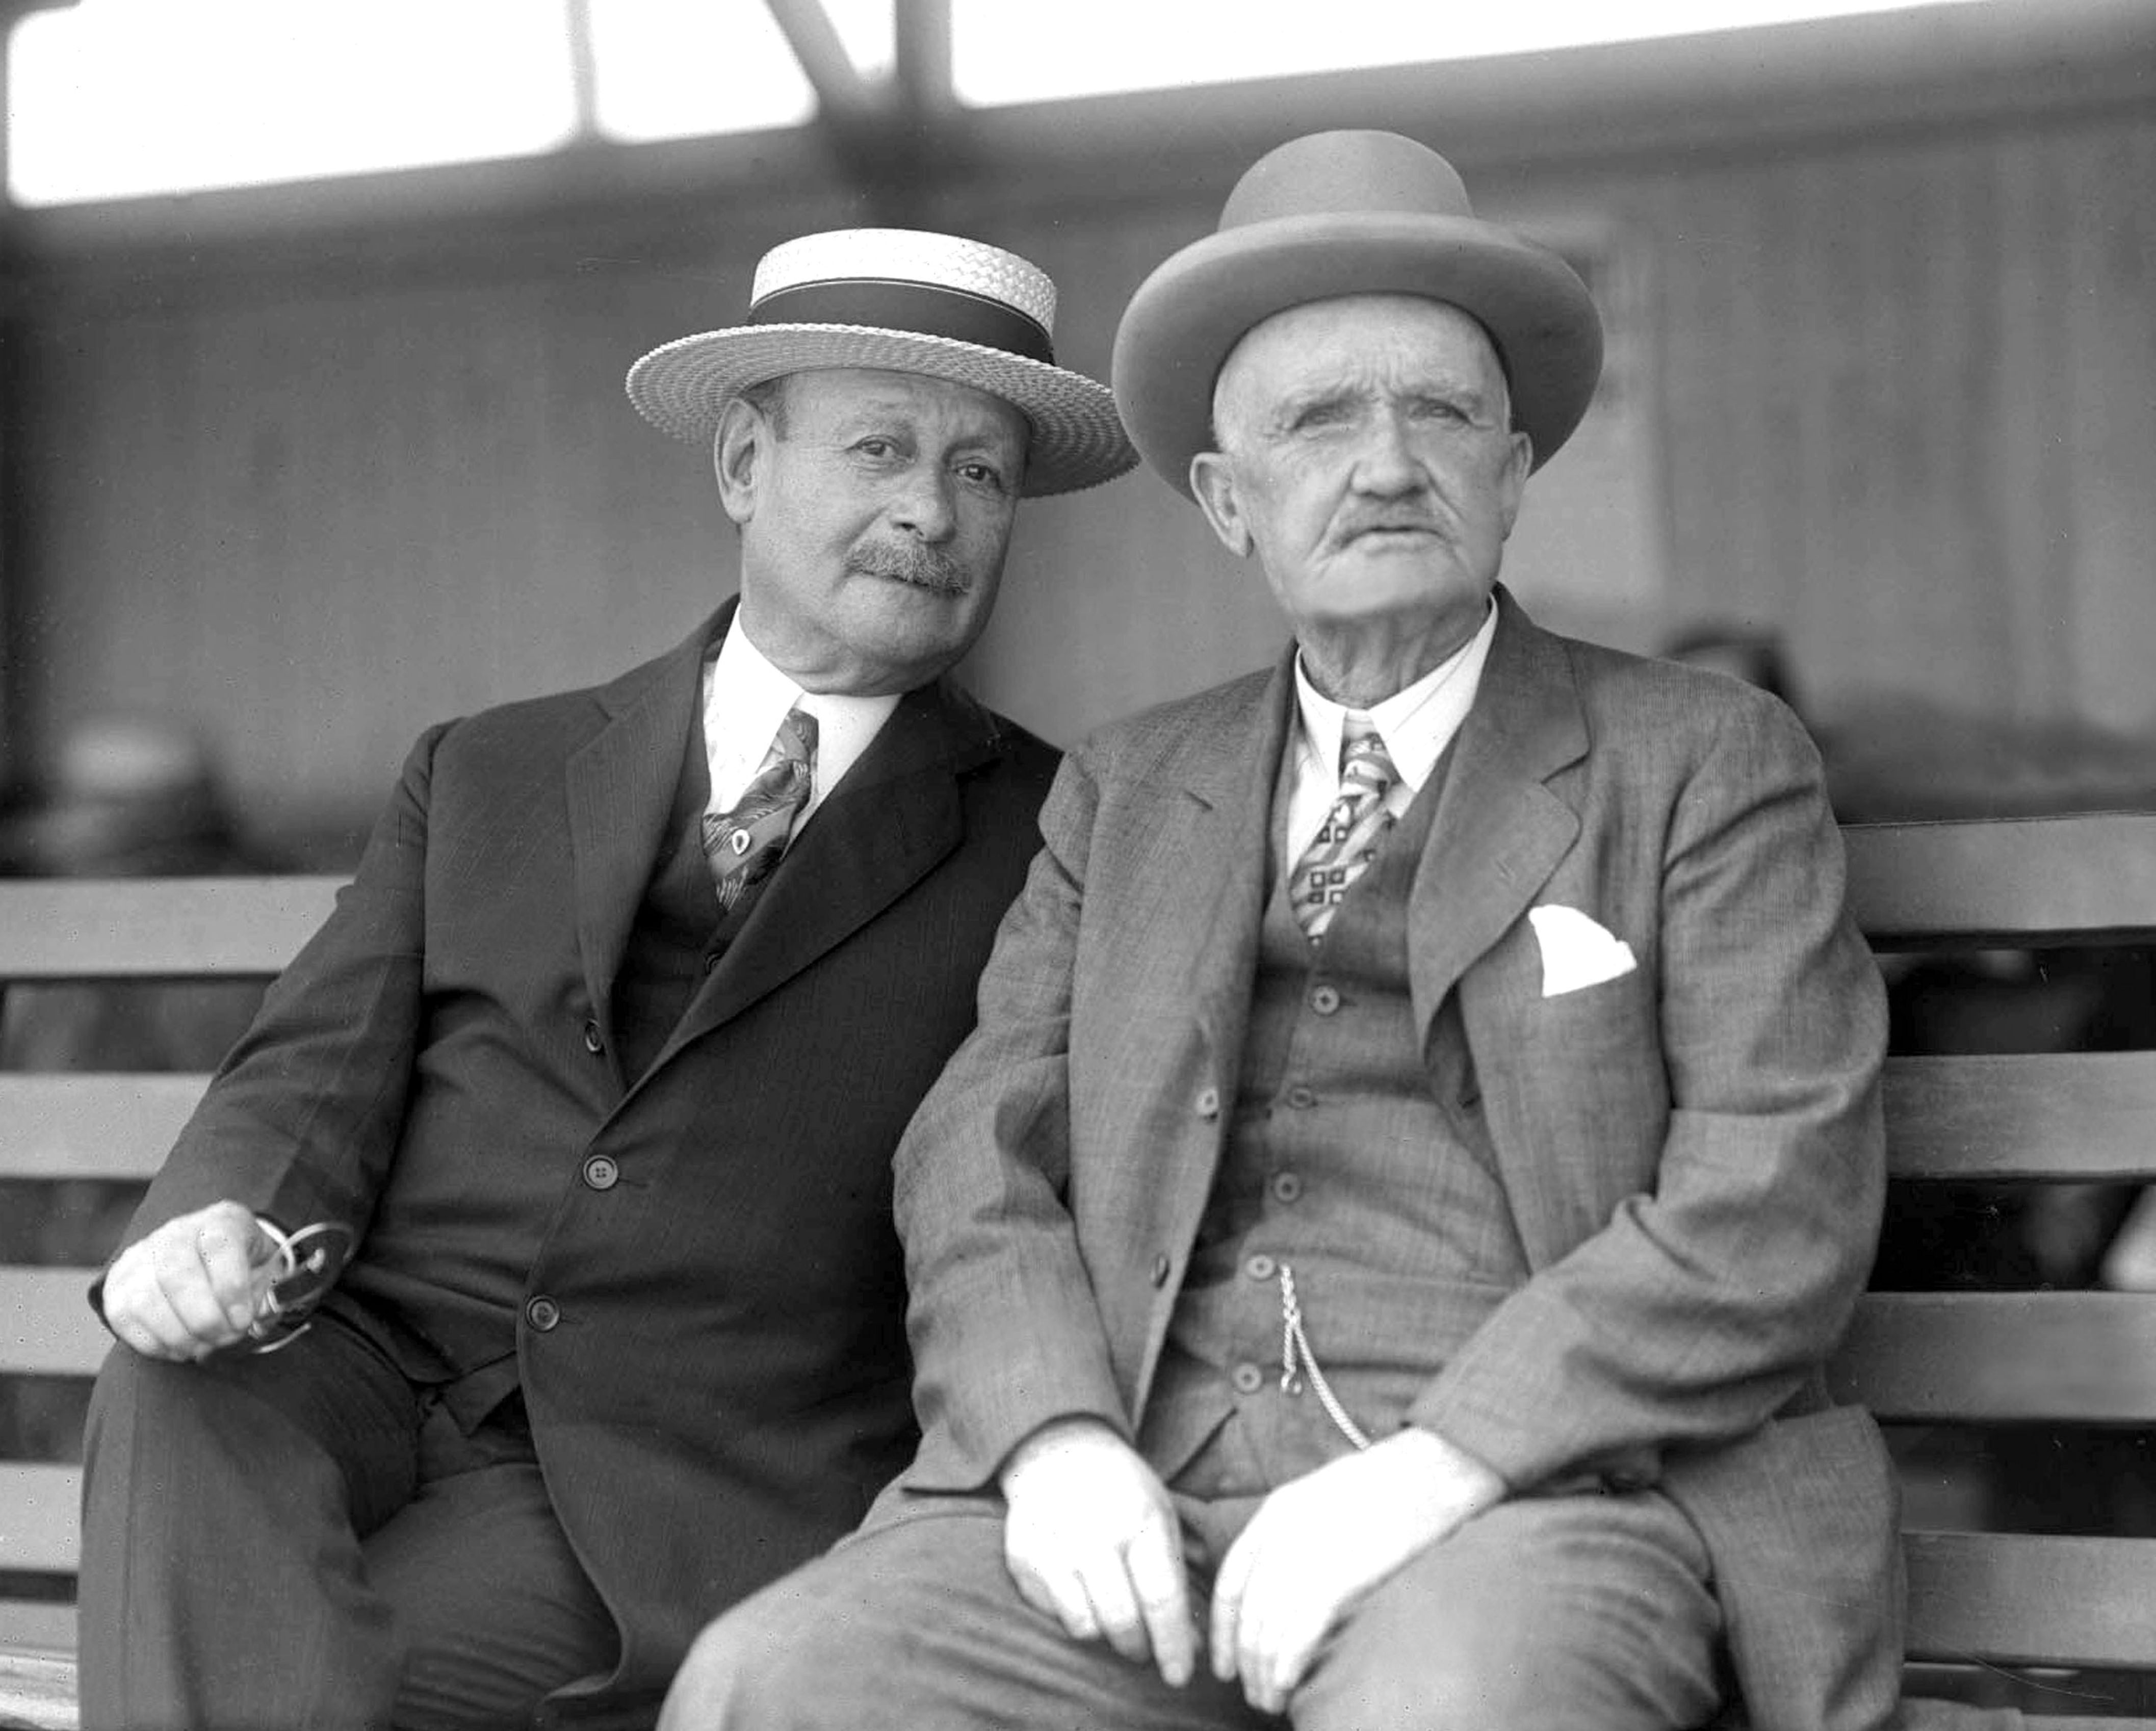 J. Adler and Matthew Byrnes in an undated photograph (Keeneland Library Cook Collection)